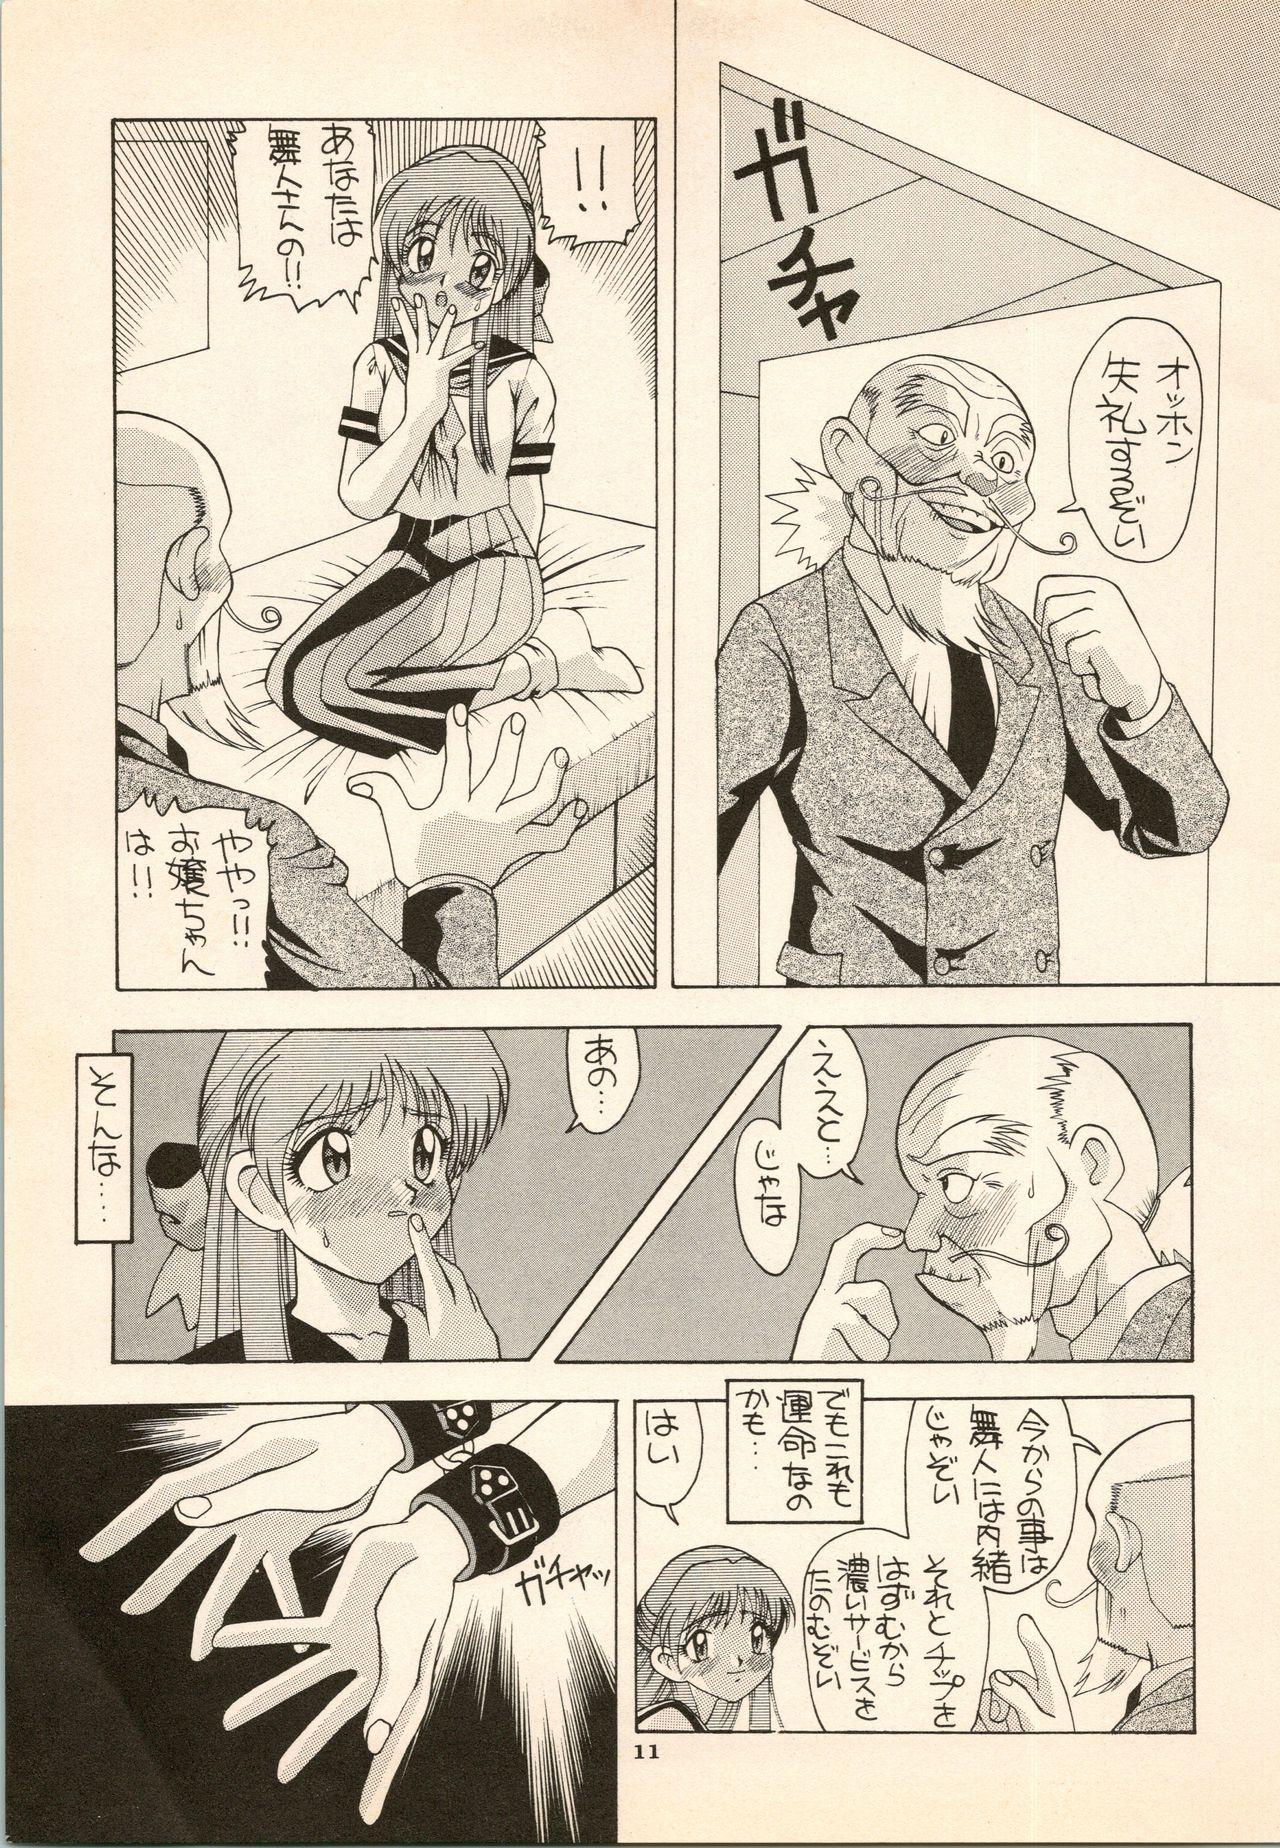 Watersports Aido 6 - Brave express might gaine Bath - Page 11